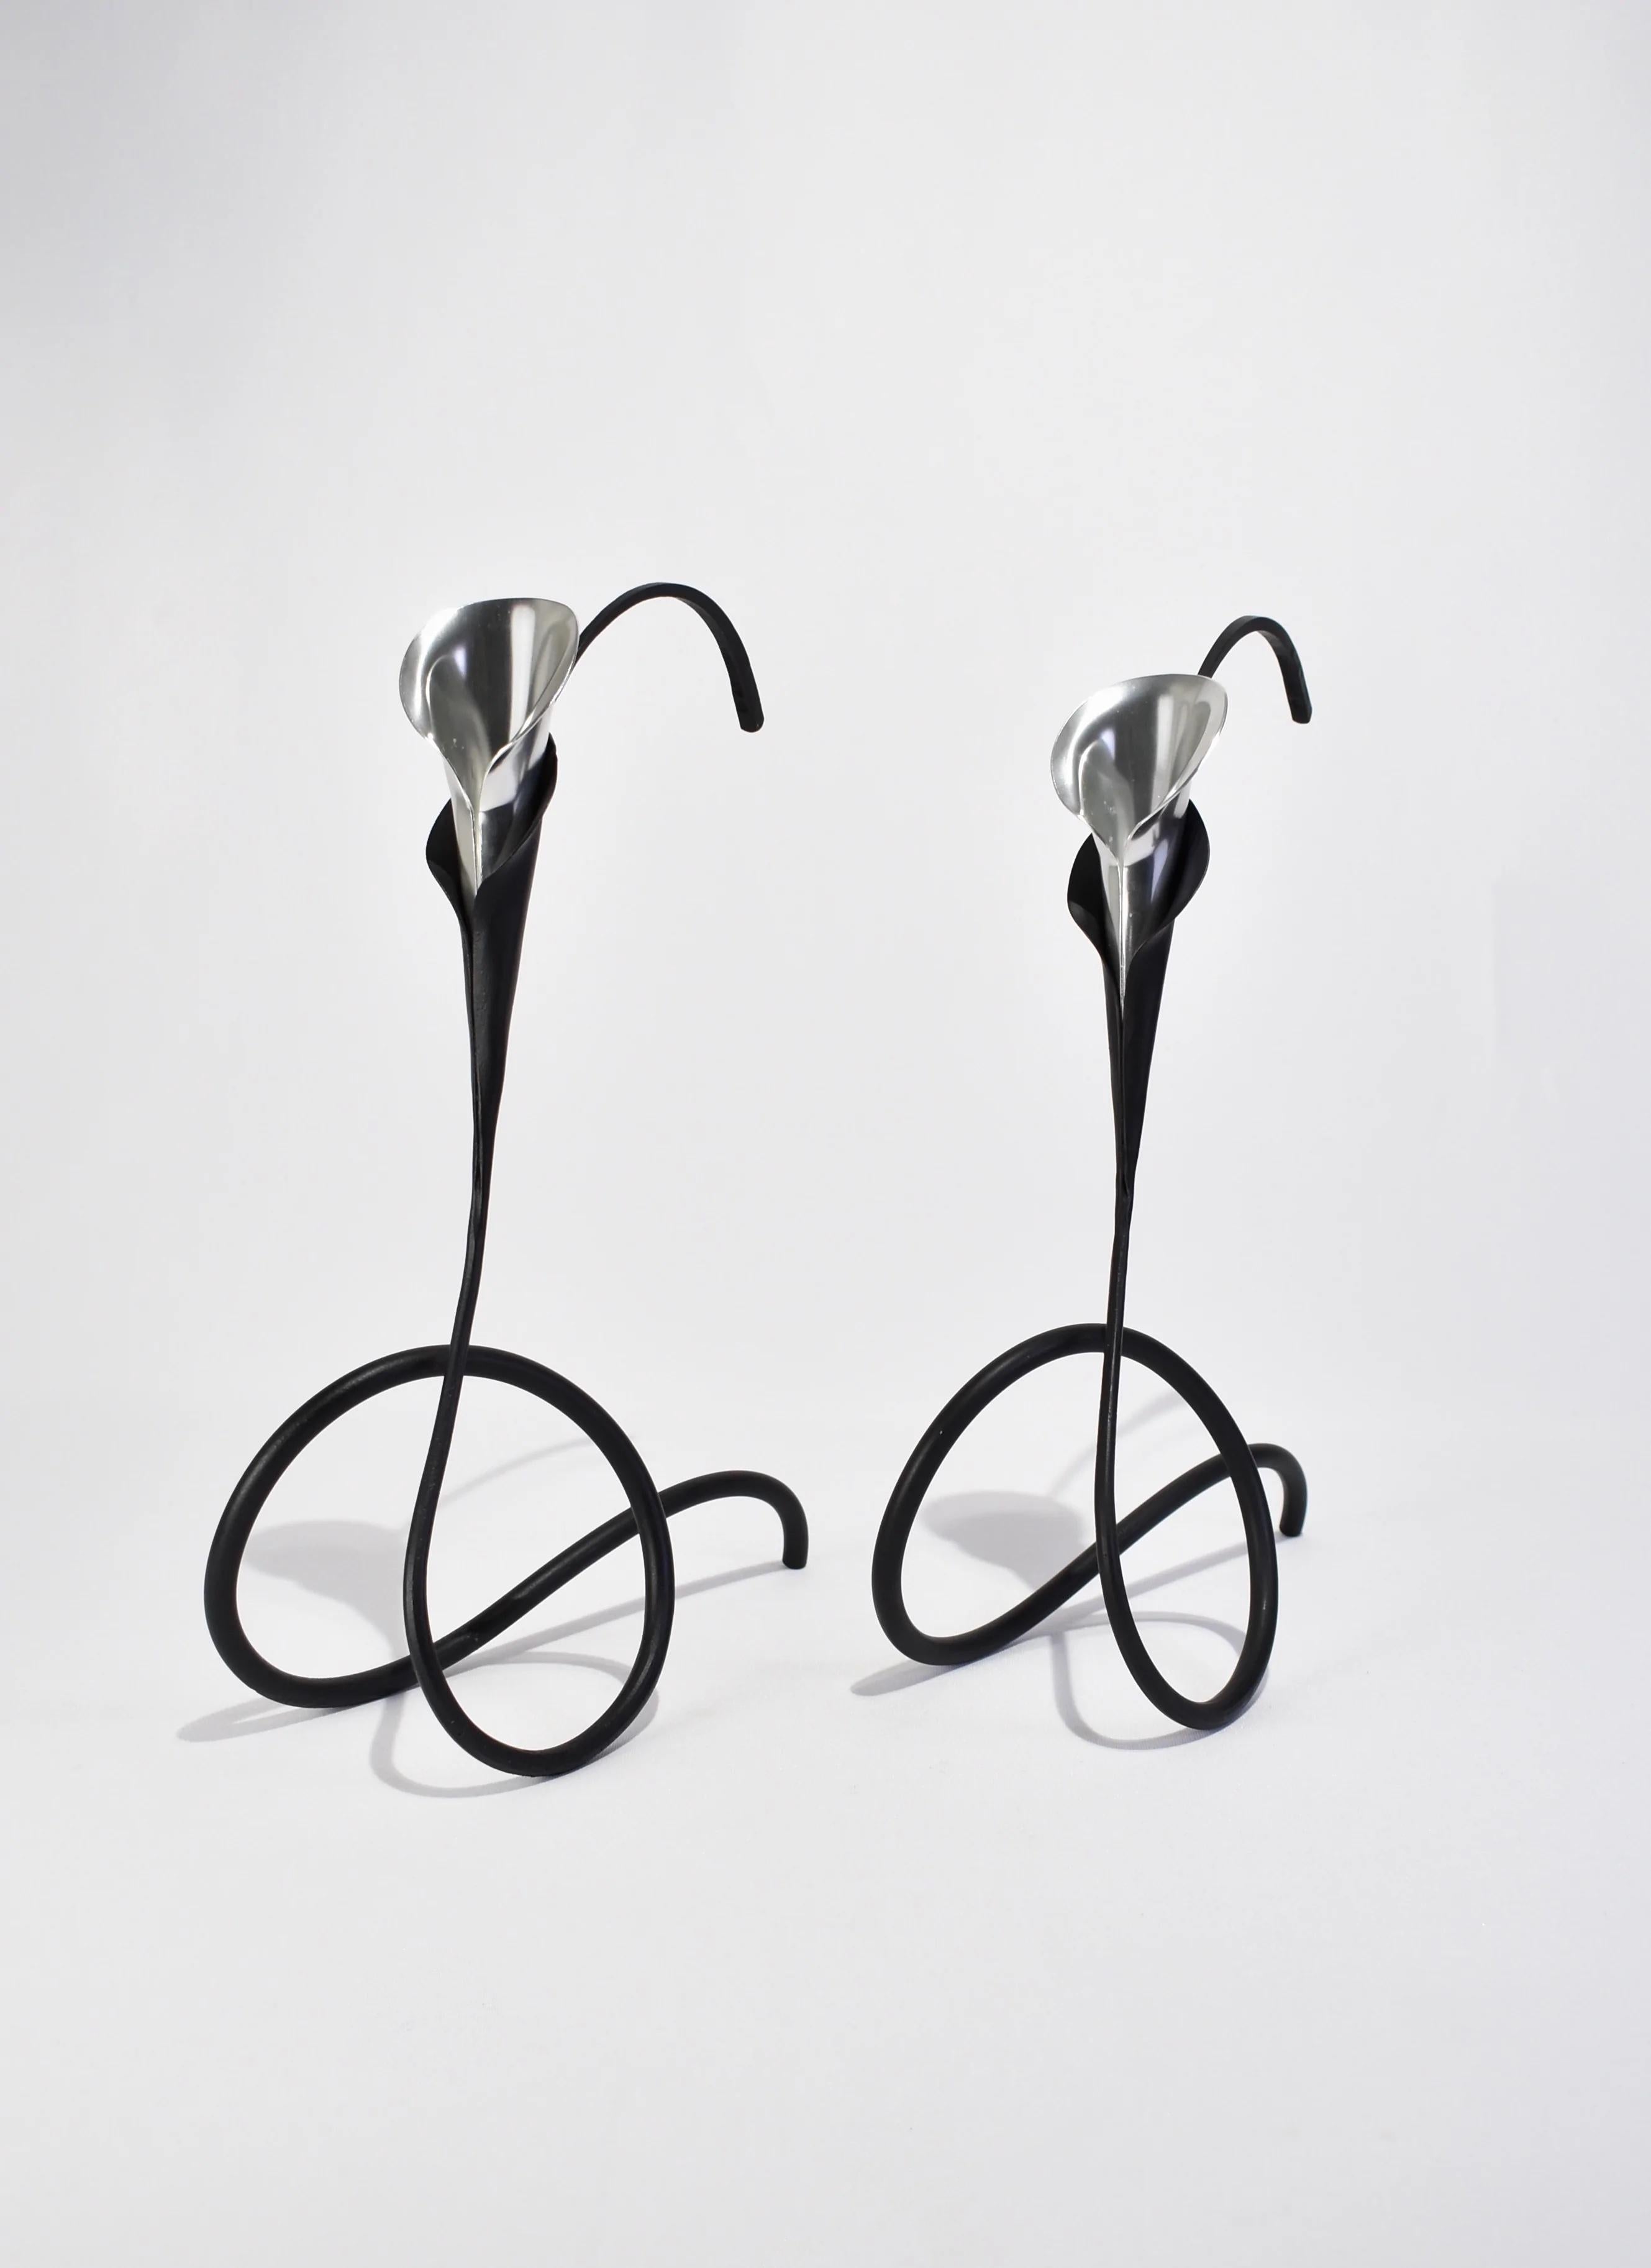 Beautiful vintage forged steel candleholders in the shape of calla lilies with aluminum inserts, set of two. Signed.